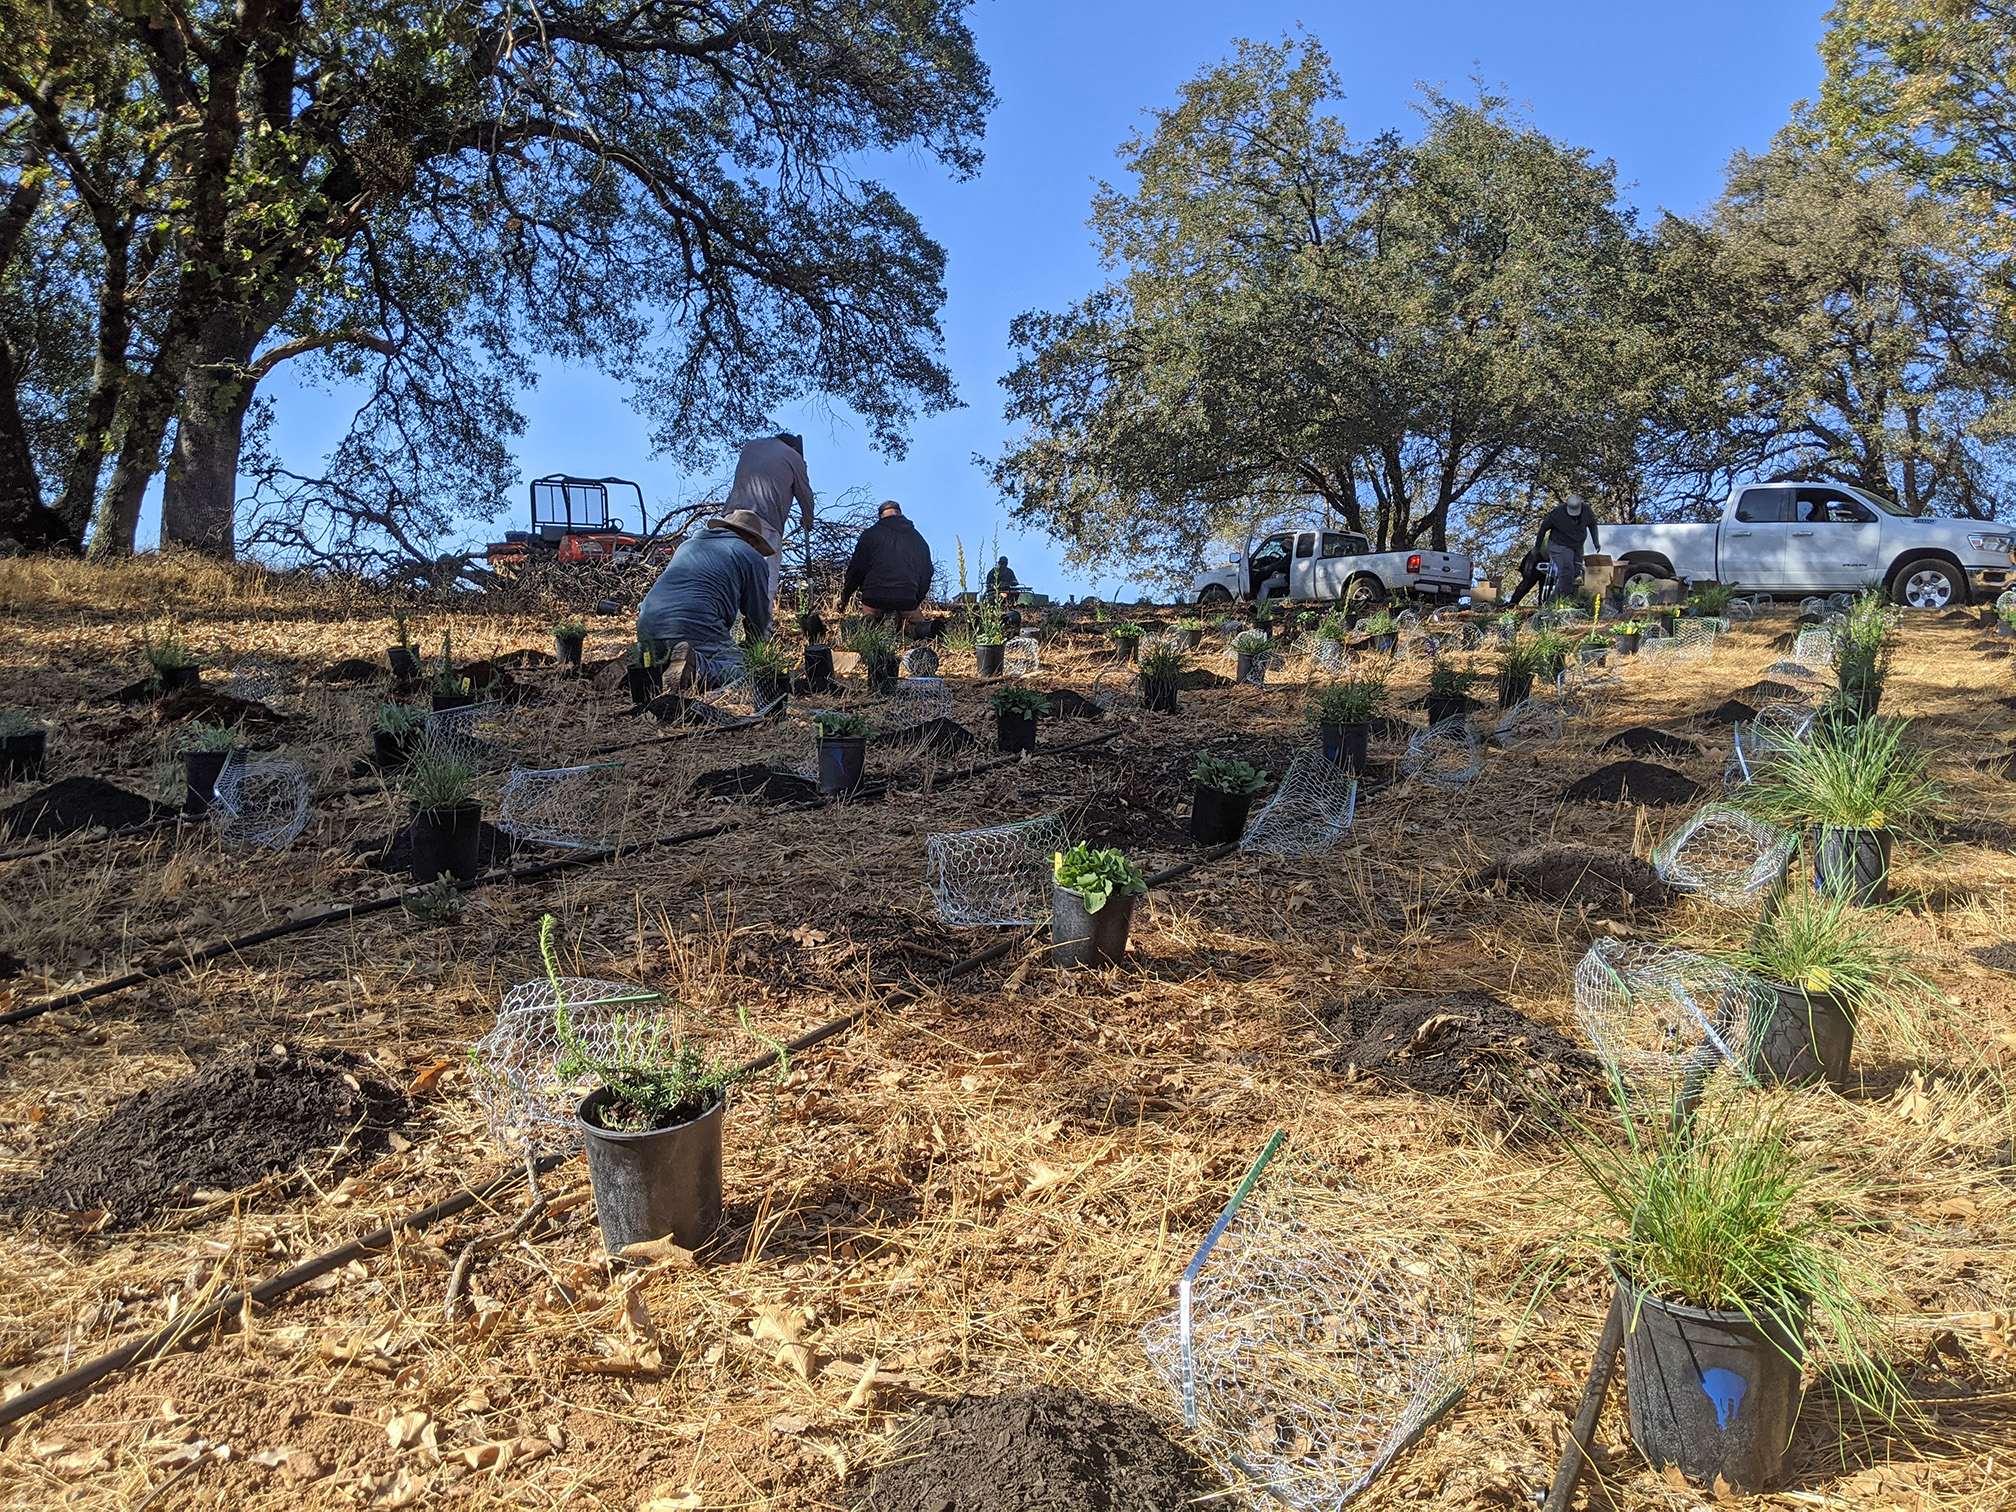 A group of farm workers planting shrubs and flowers beside mature oak trees. The plants are still in their pots and have been placed in rows beside black irrigation pipes ready for planting.